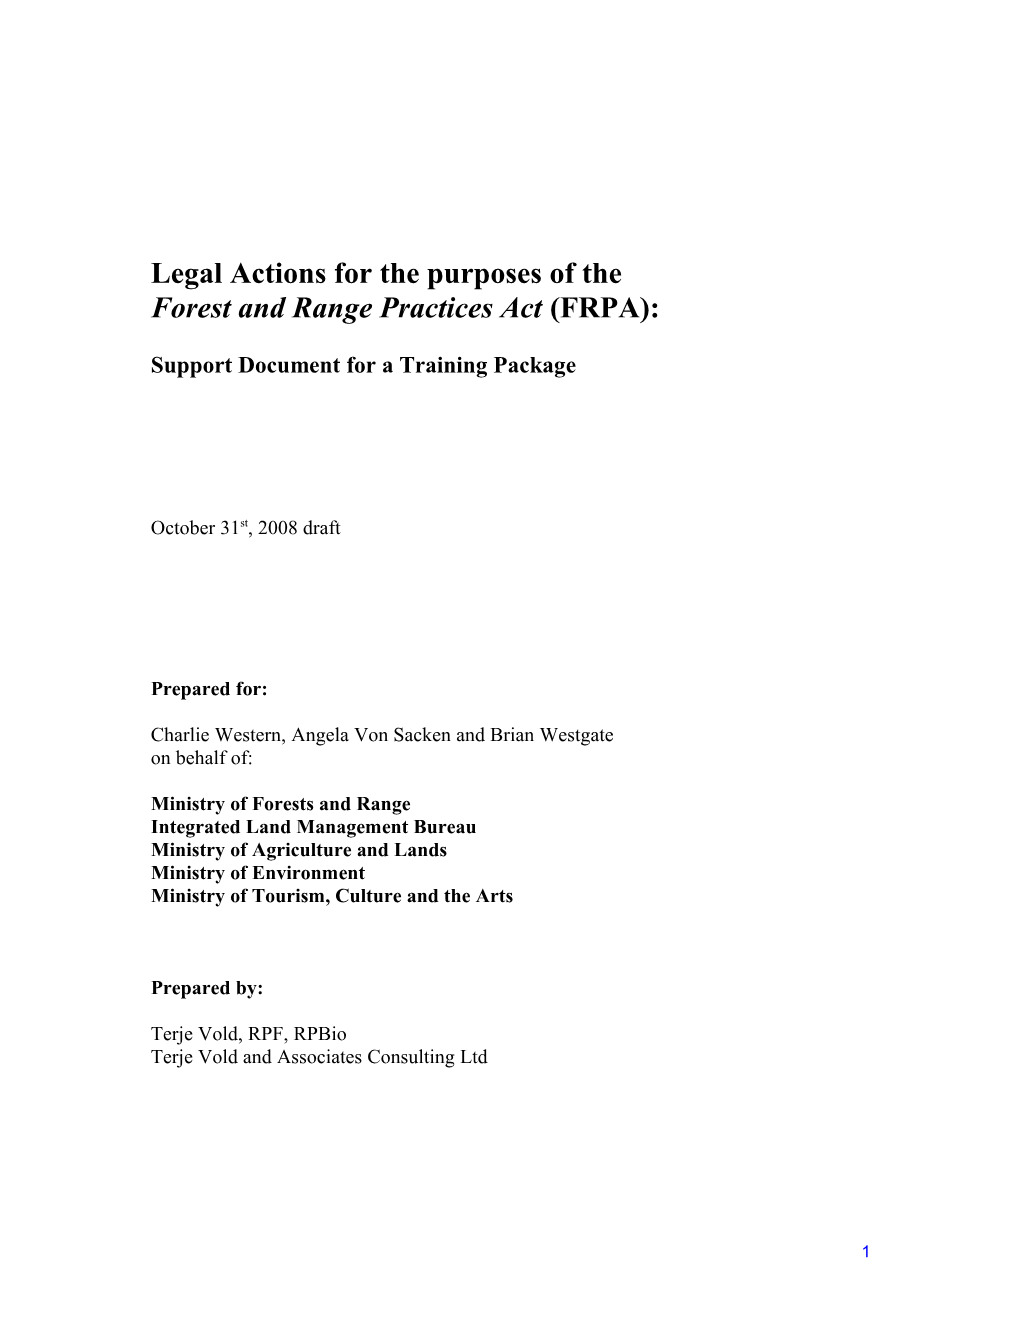 Legal Actions Under FRPA